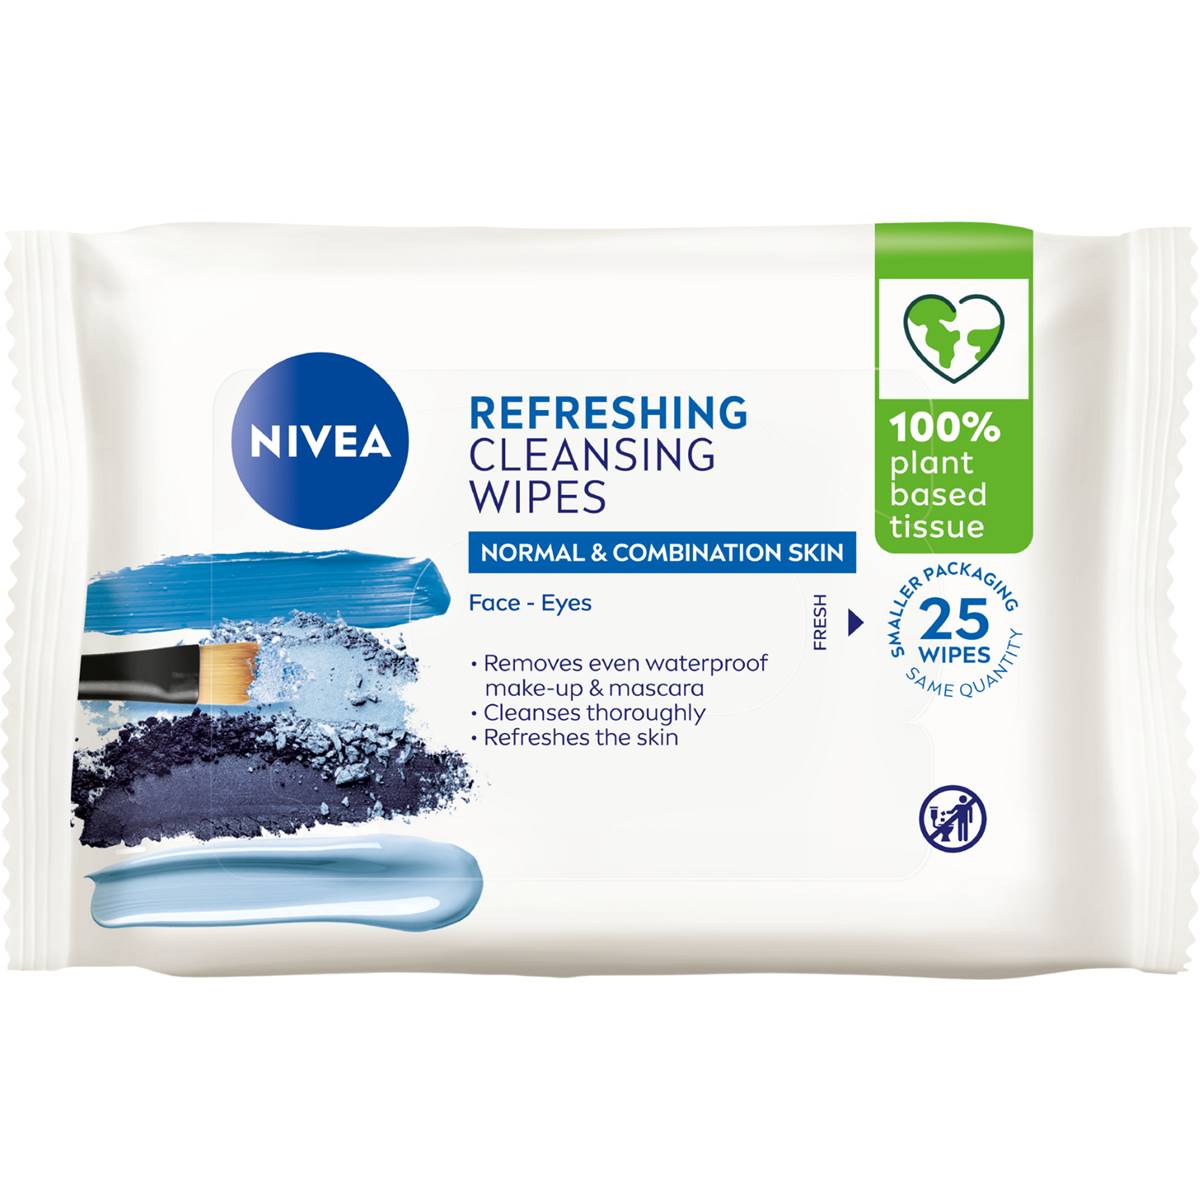 Nivea Refreshing Biodegradable Face Cleansing Makeup Wipes 25 Pack